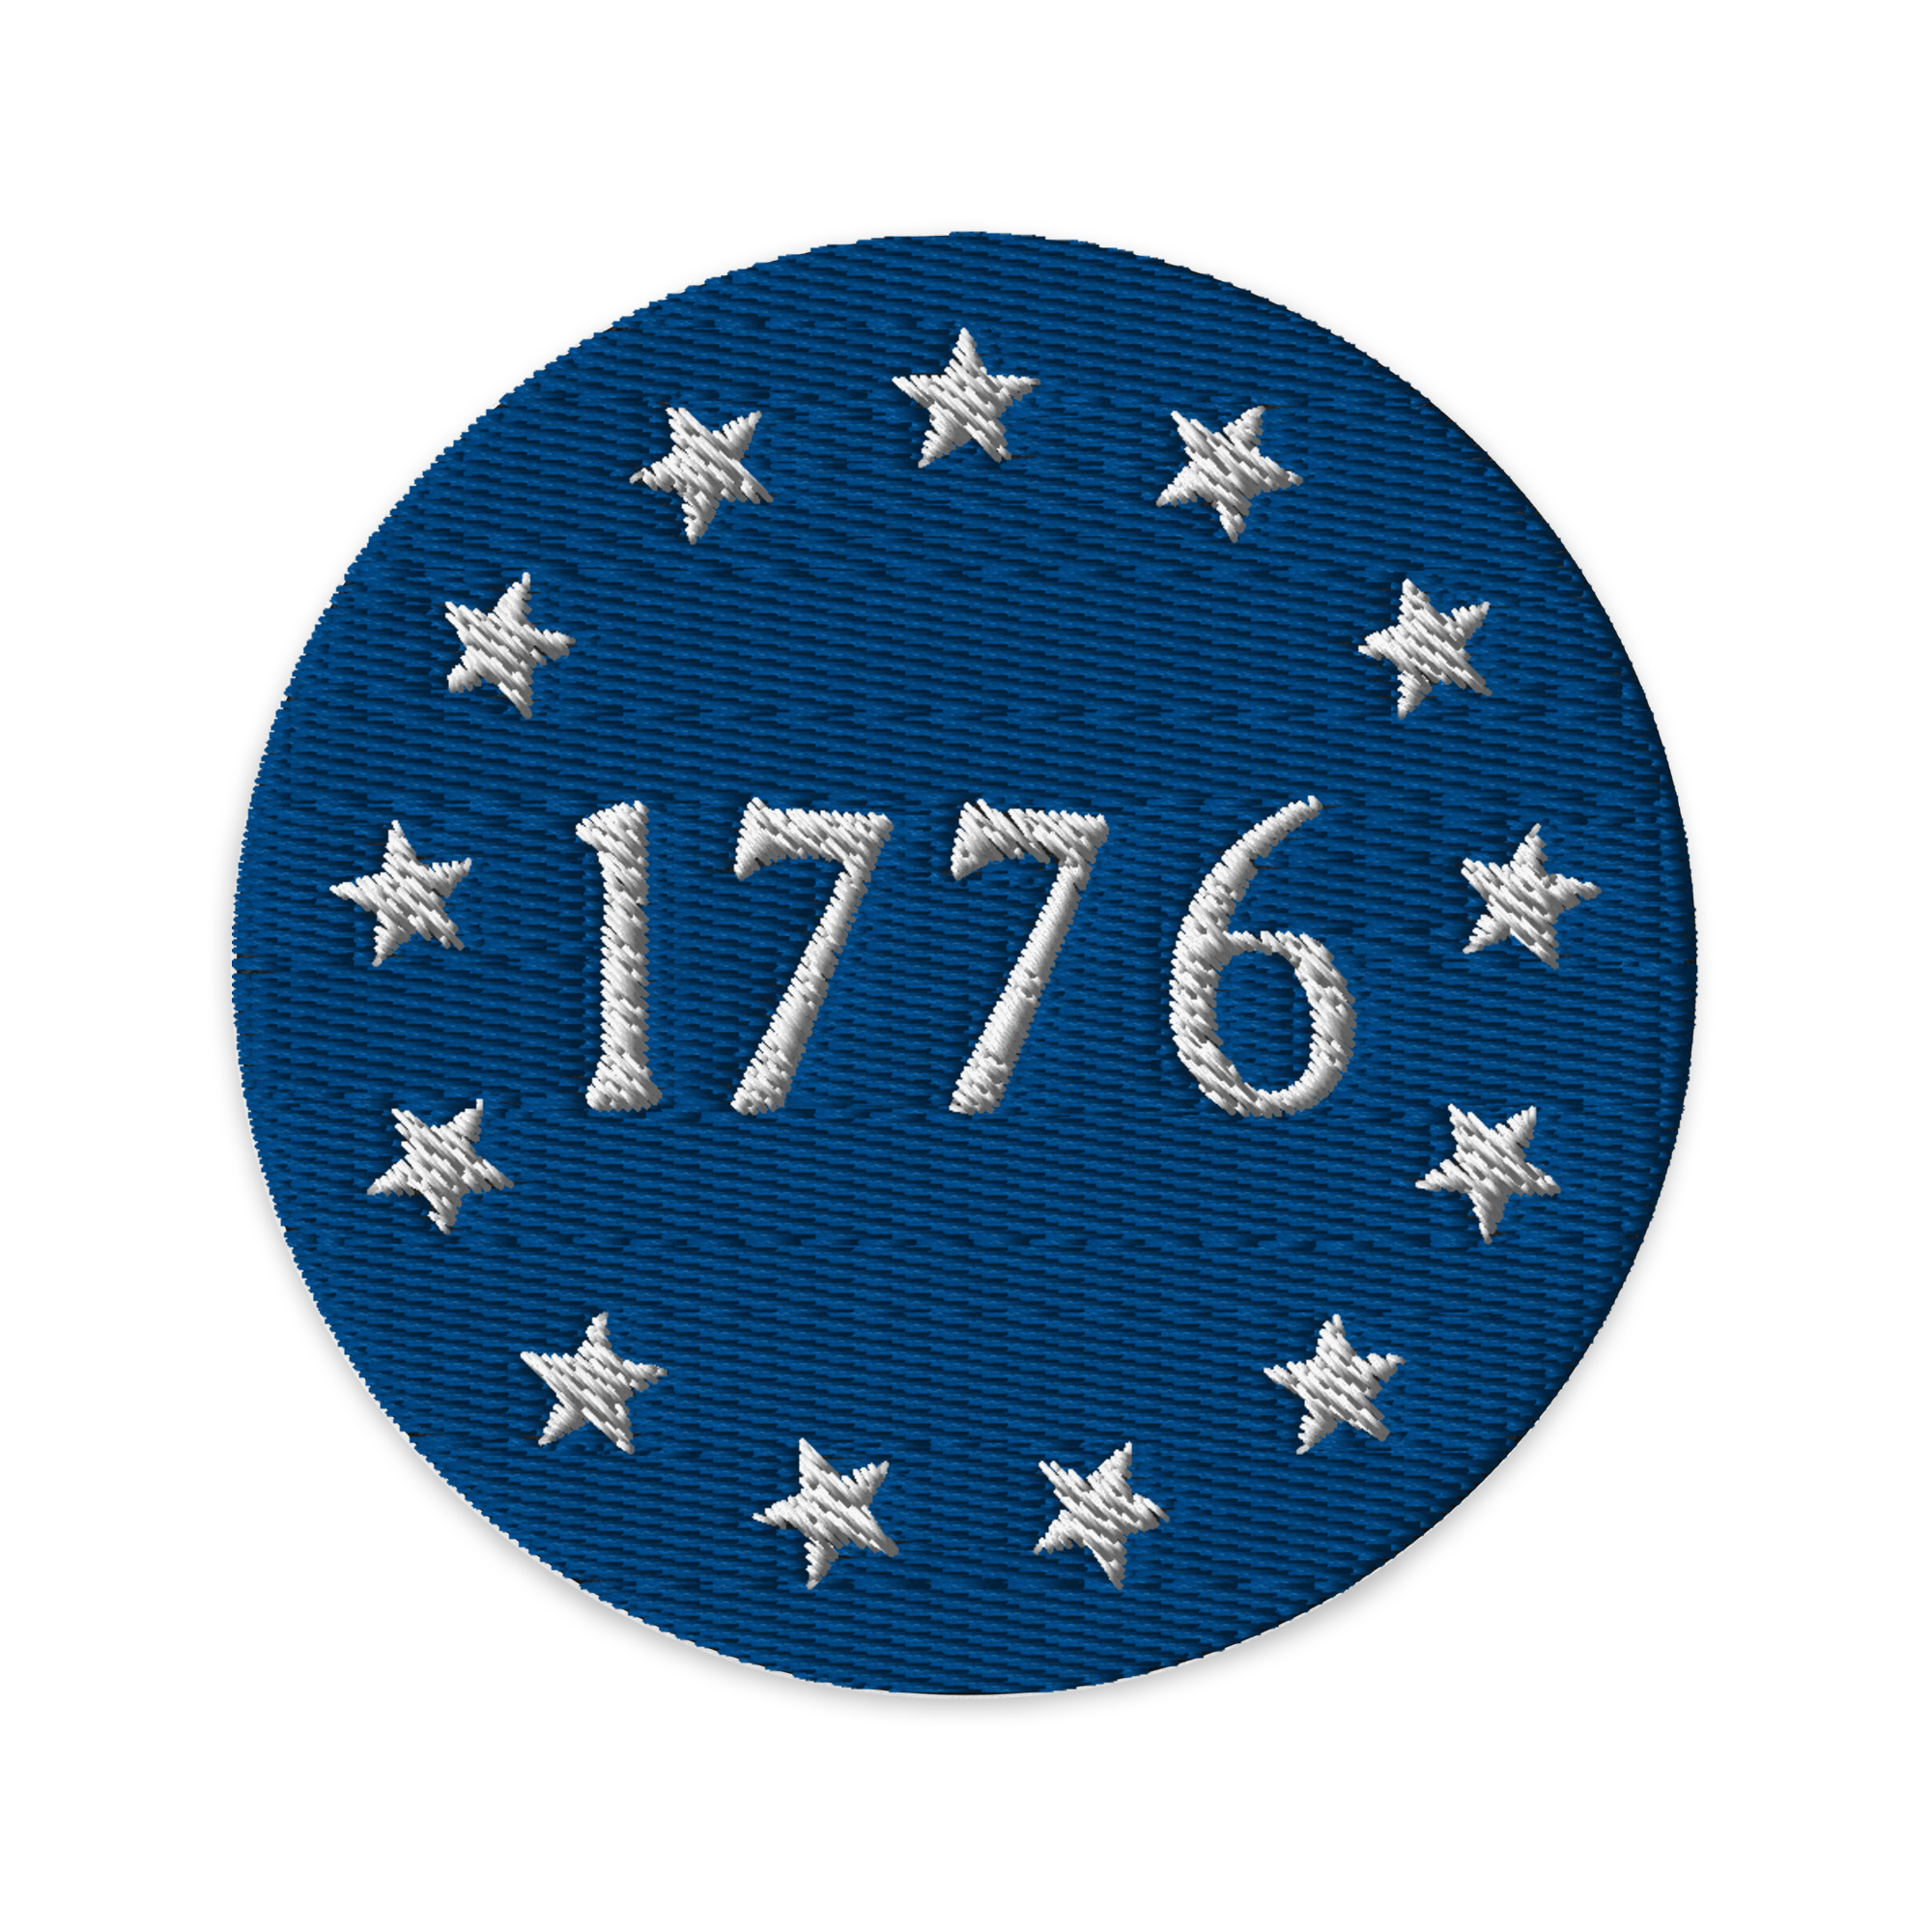 Blue And White 1776 Flag Patch Patches Xxv Tactical